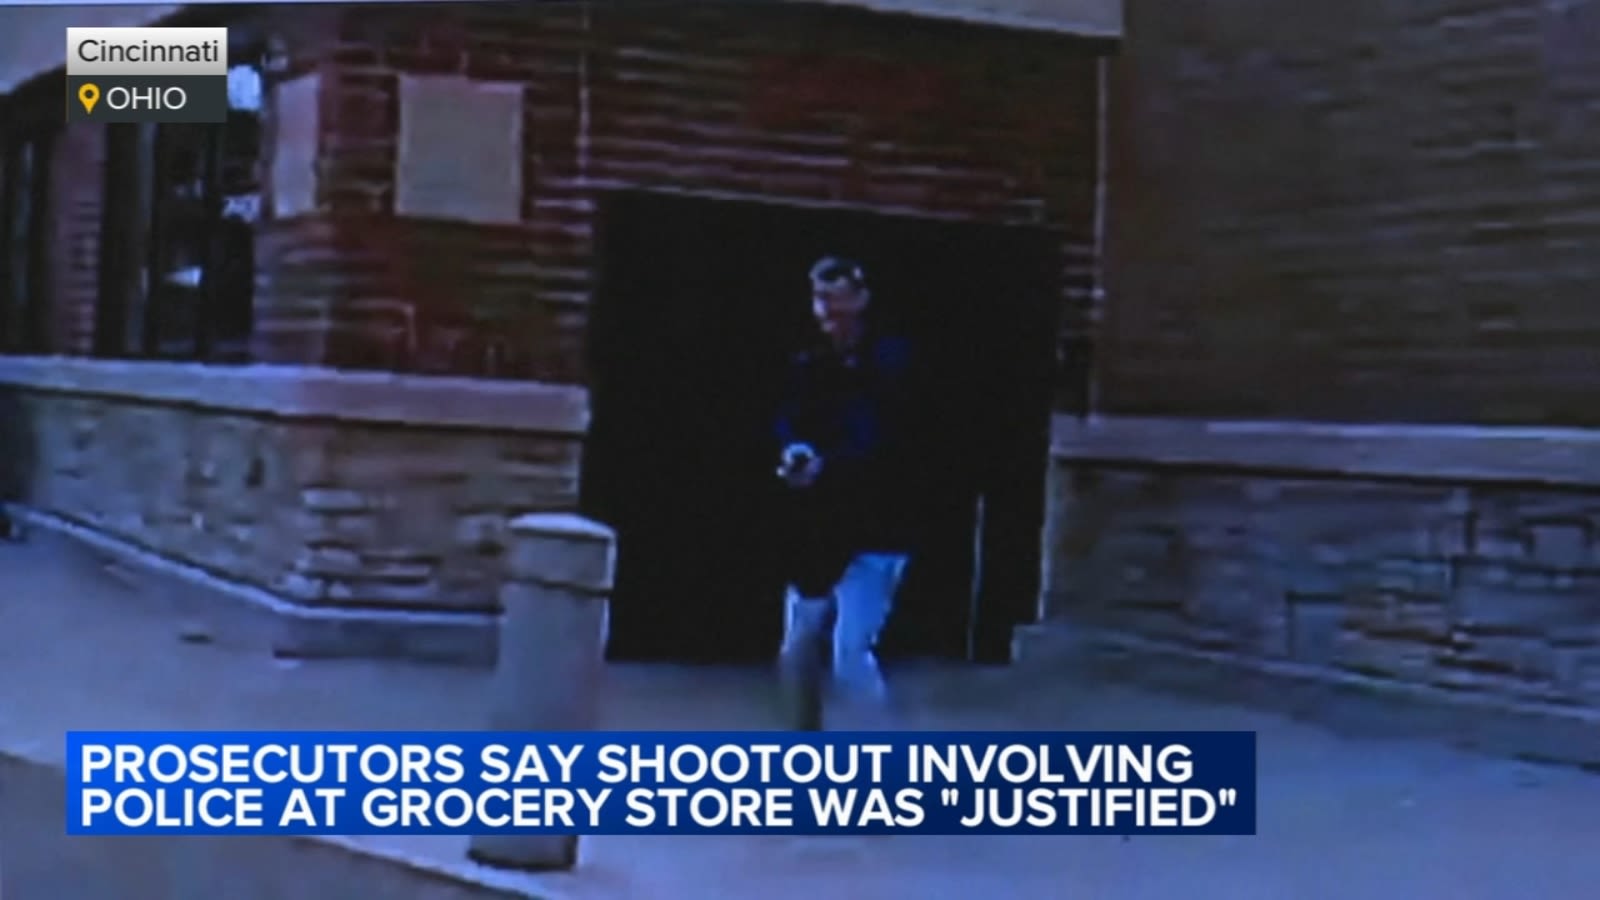 Police-involved shootout at Ohio Kroger was 'justified,' prosecutors say: VIDEO